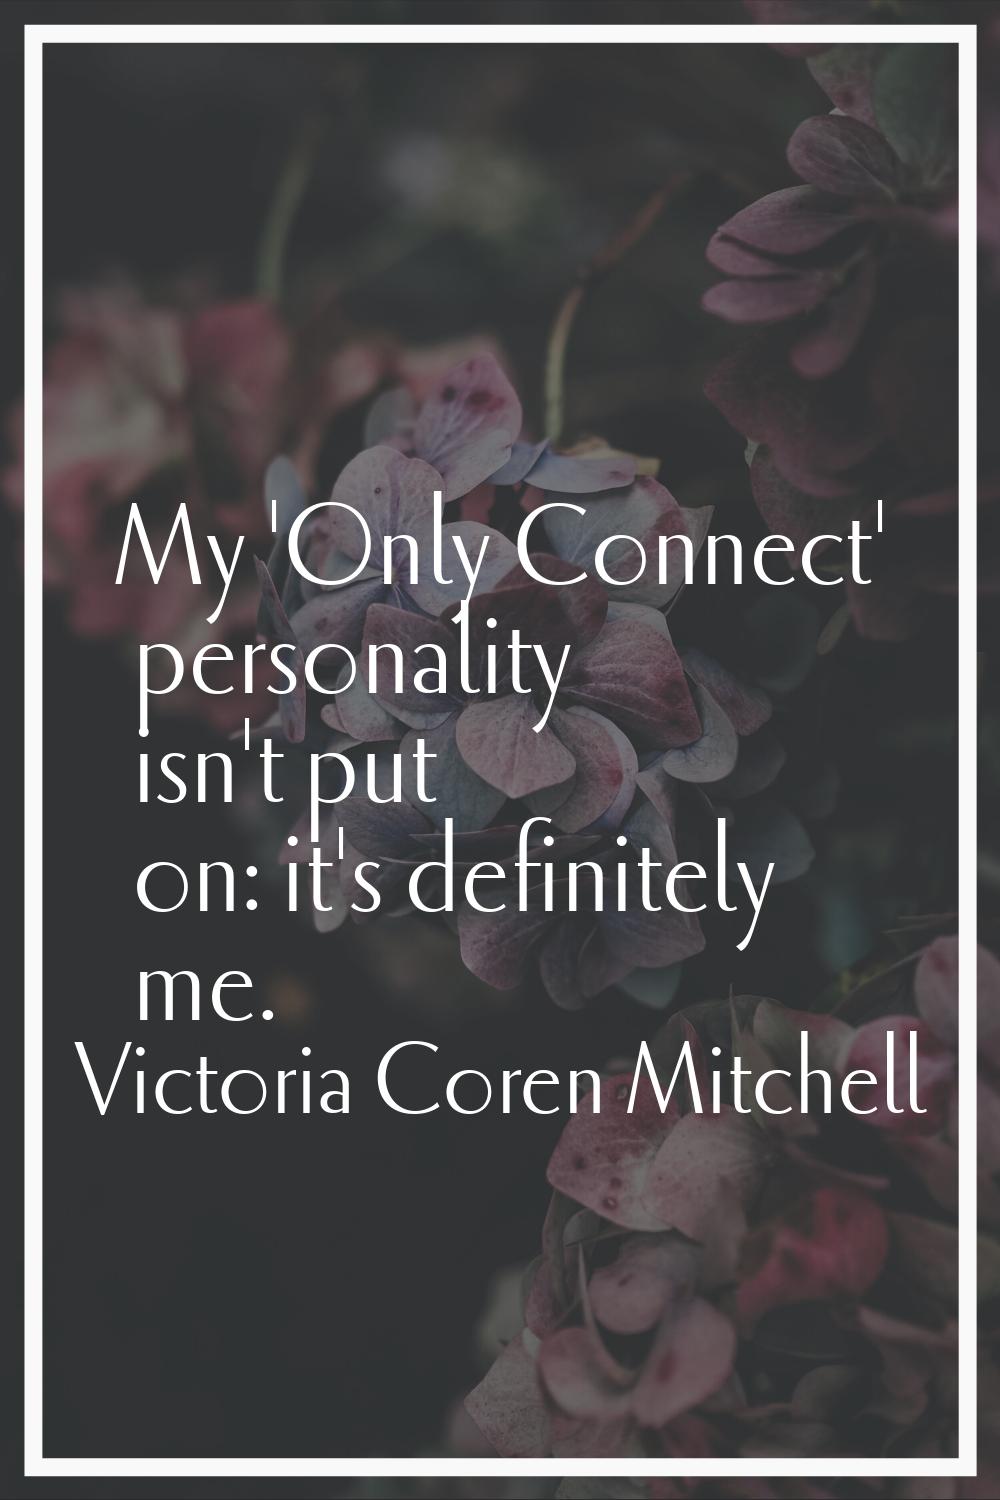 My 'Only Connect' personality isn't put on: it's definitely me.